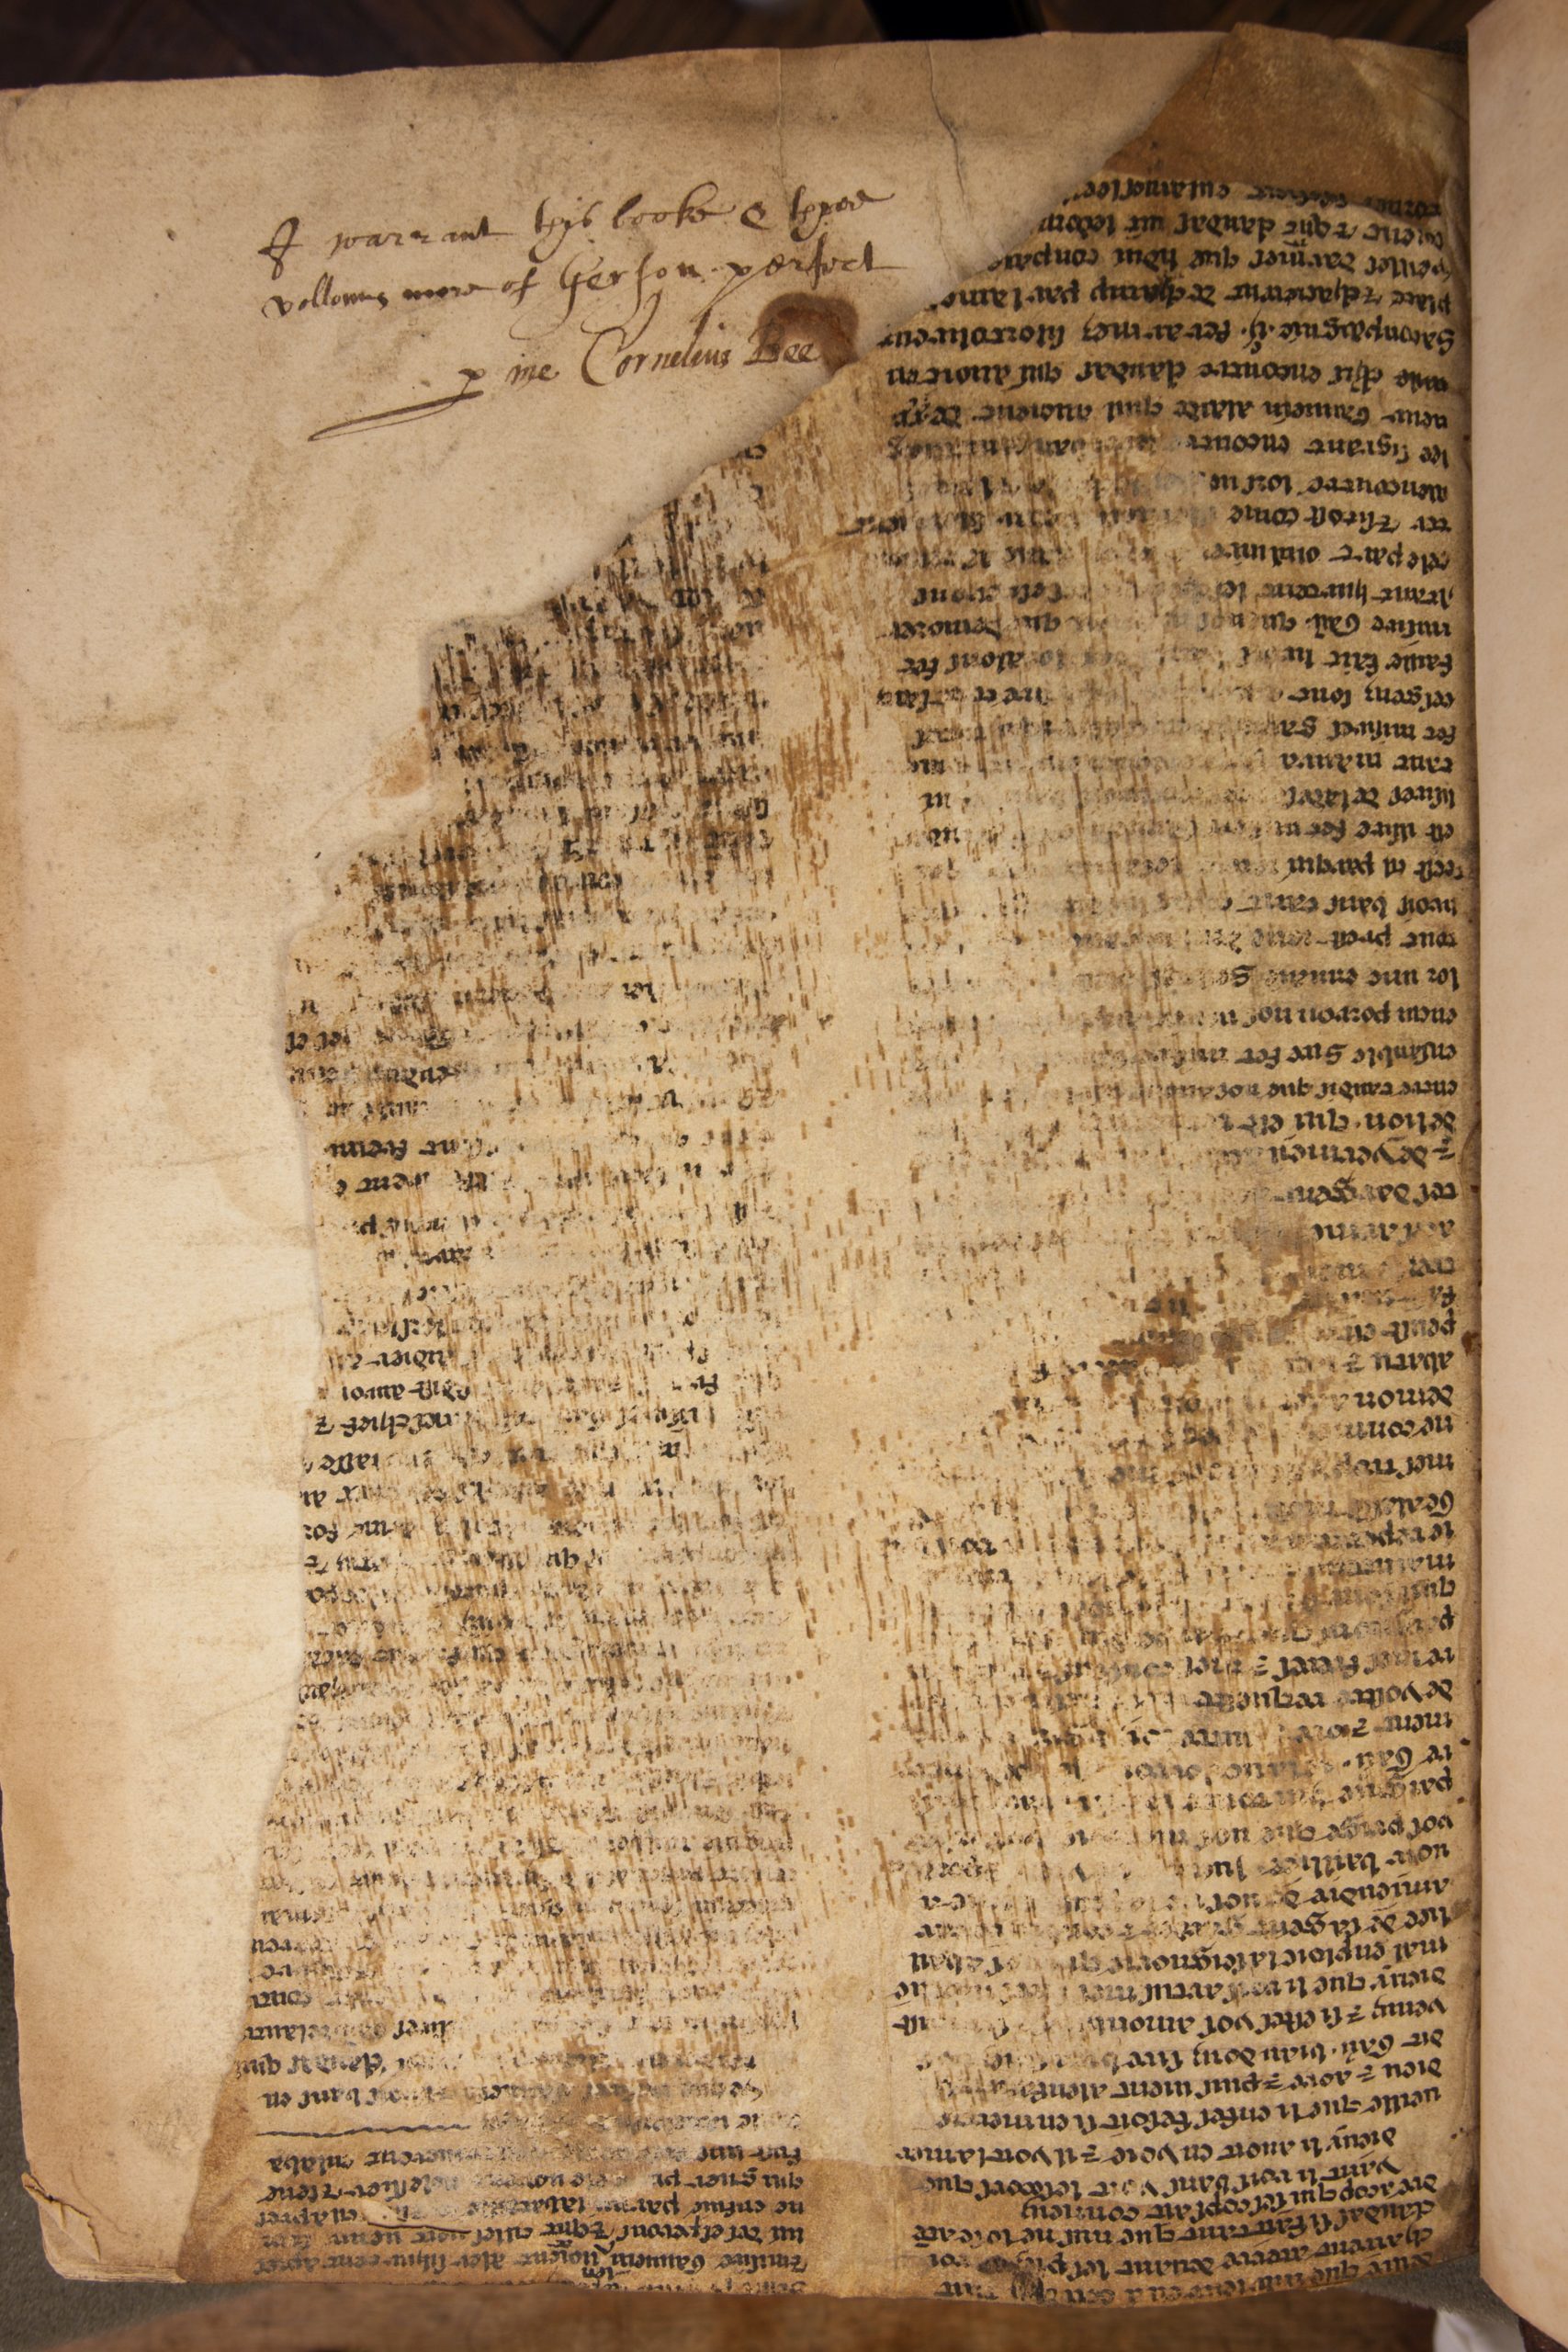 One of the manuscript fragments showing faded ink and an inscription. (Photo: Don Hooper)